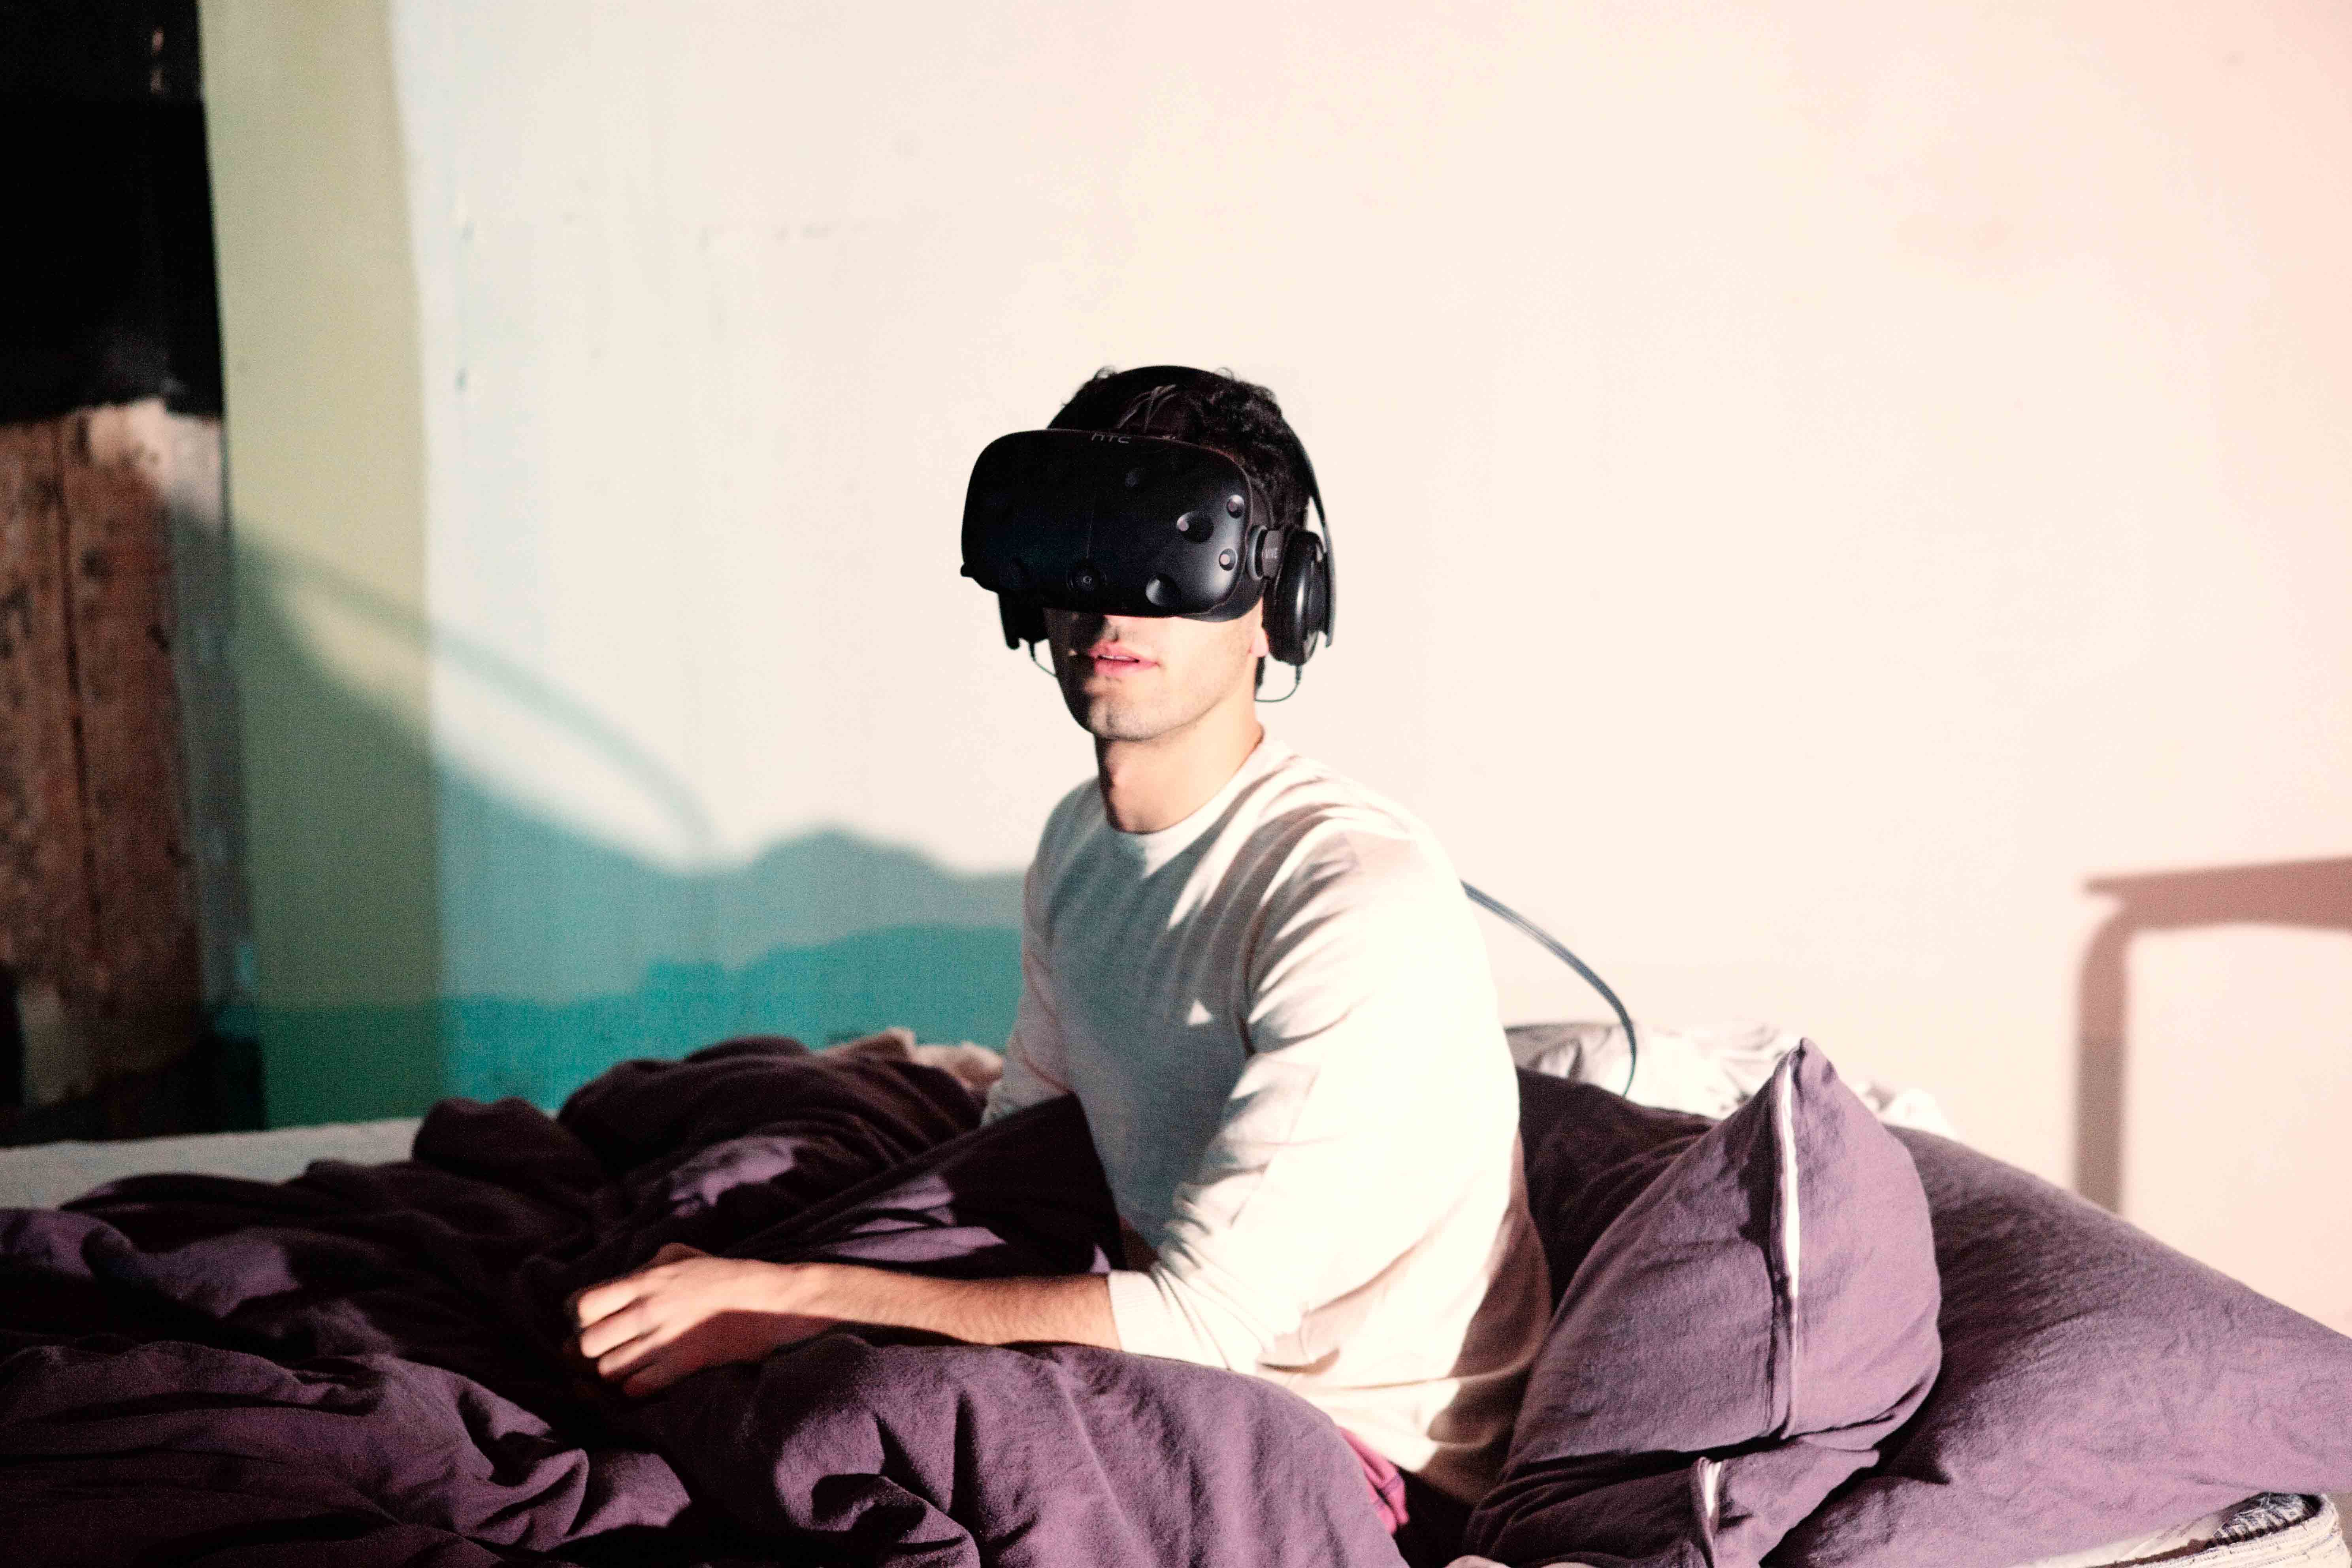 The artist wearing the VR headset, in bed.